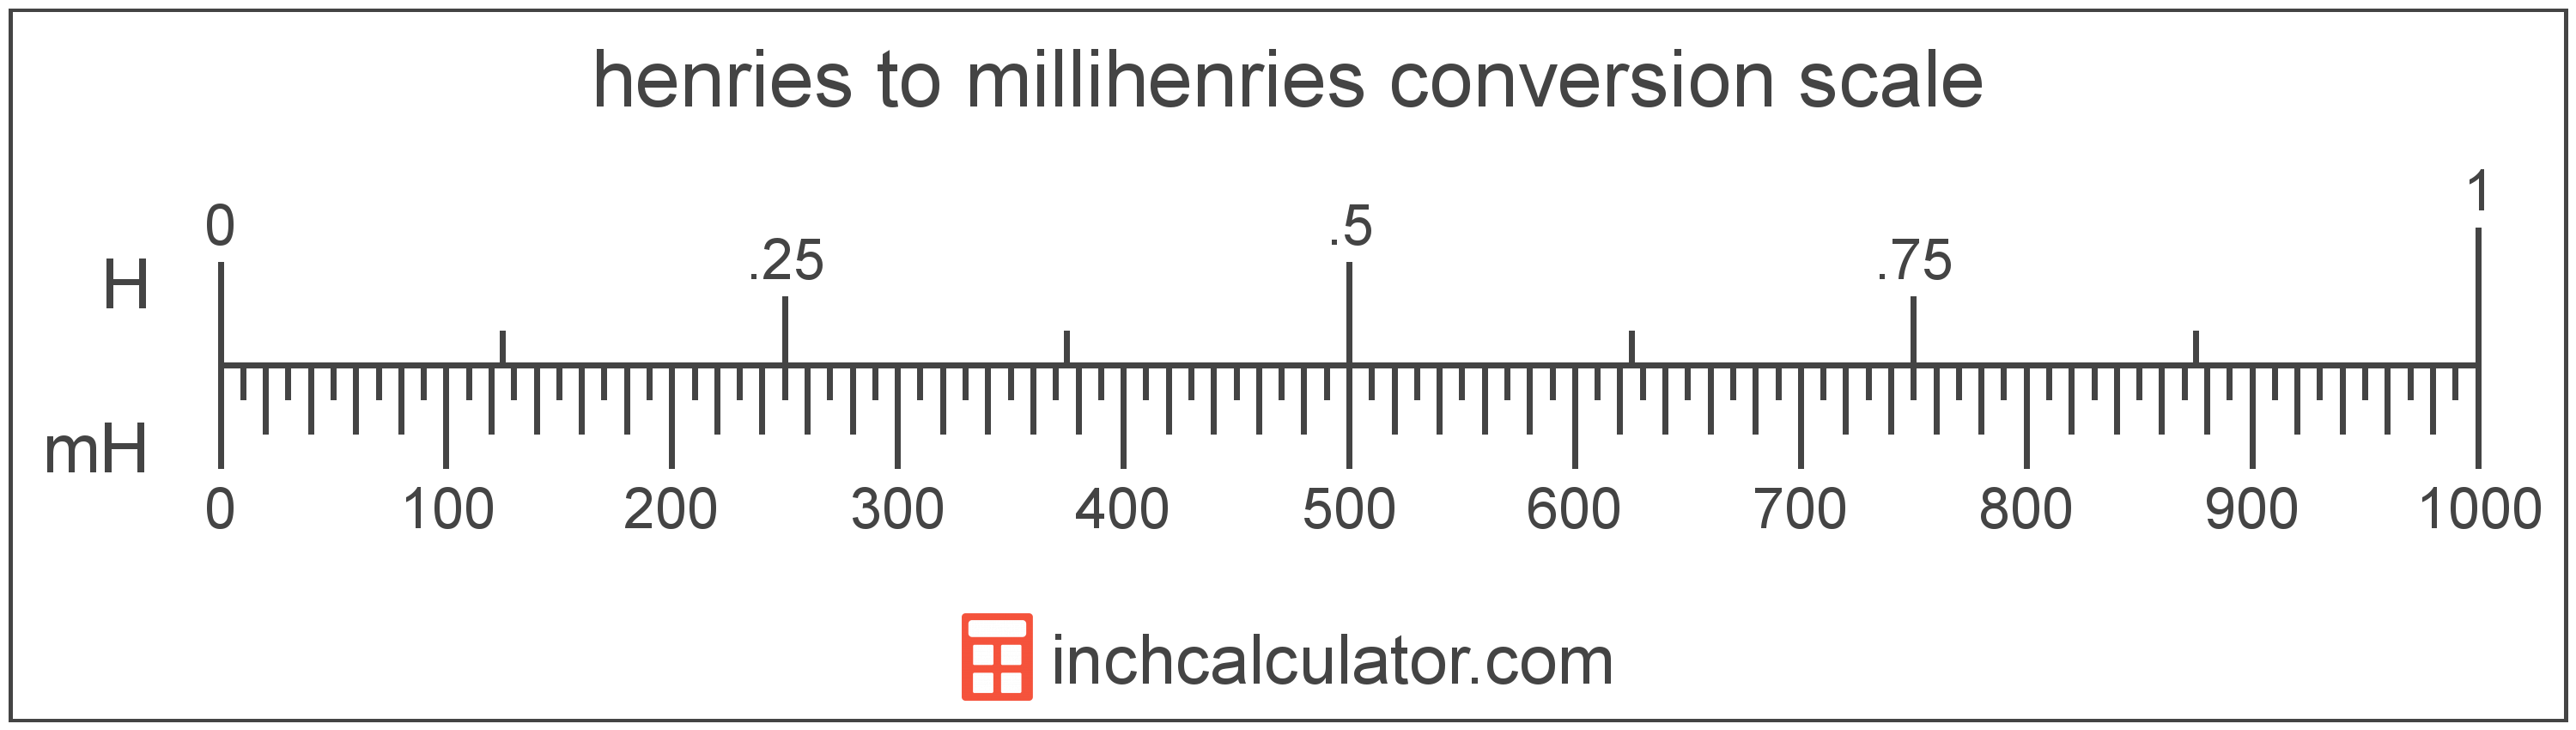 conversion scale showing henries and equivalent millihenries electrical inductance values